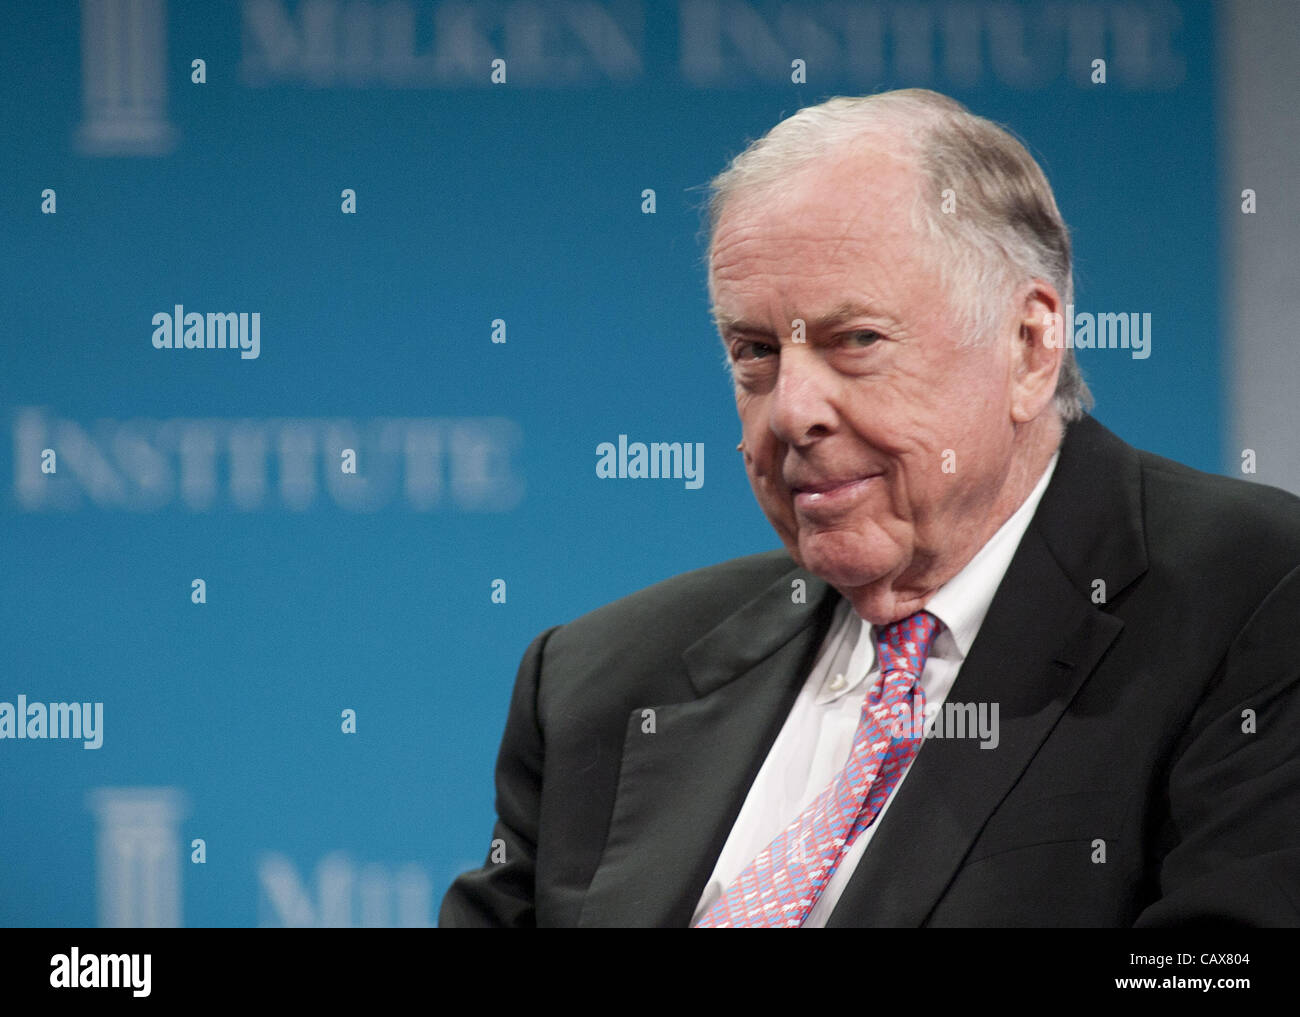 April 30, 2012 - Beverly Hills, California, USA - T. Boone Pickens, Entrepreneur and Philanthropist; Founder, BP Capital at the panel discussion entitled 'Mike Milken Interviews Eike Batista and T. Boone Pickens'  during the Milken Institute Global Conference held Monday, April 30 2012 at the Hilton Stock Photo